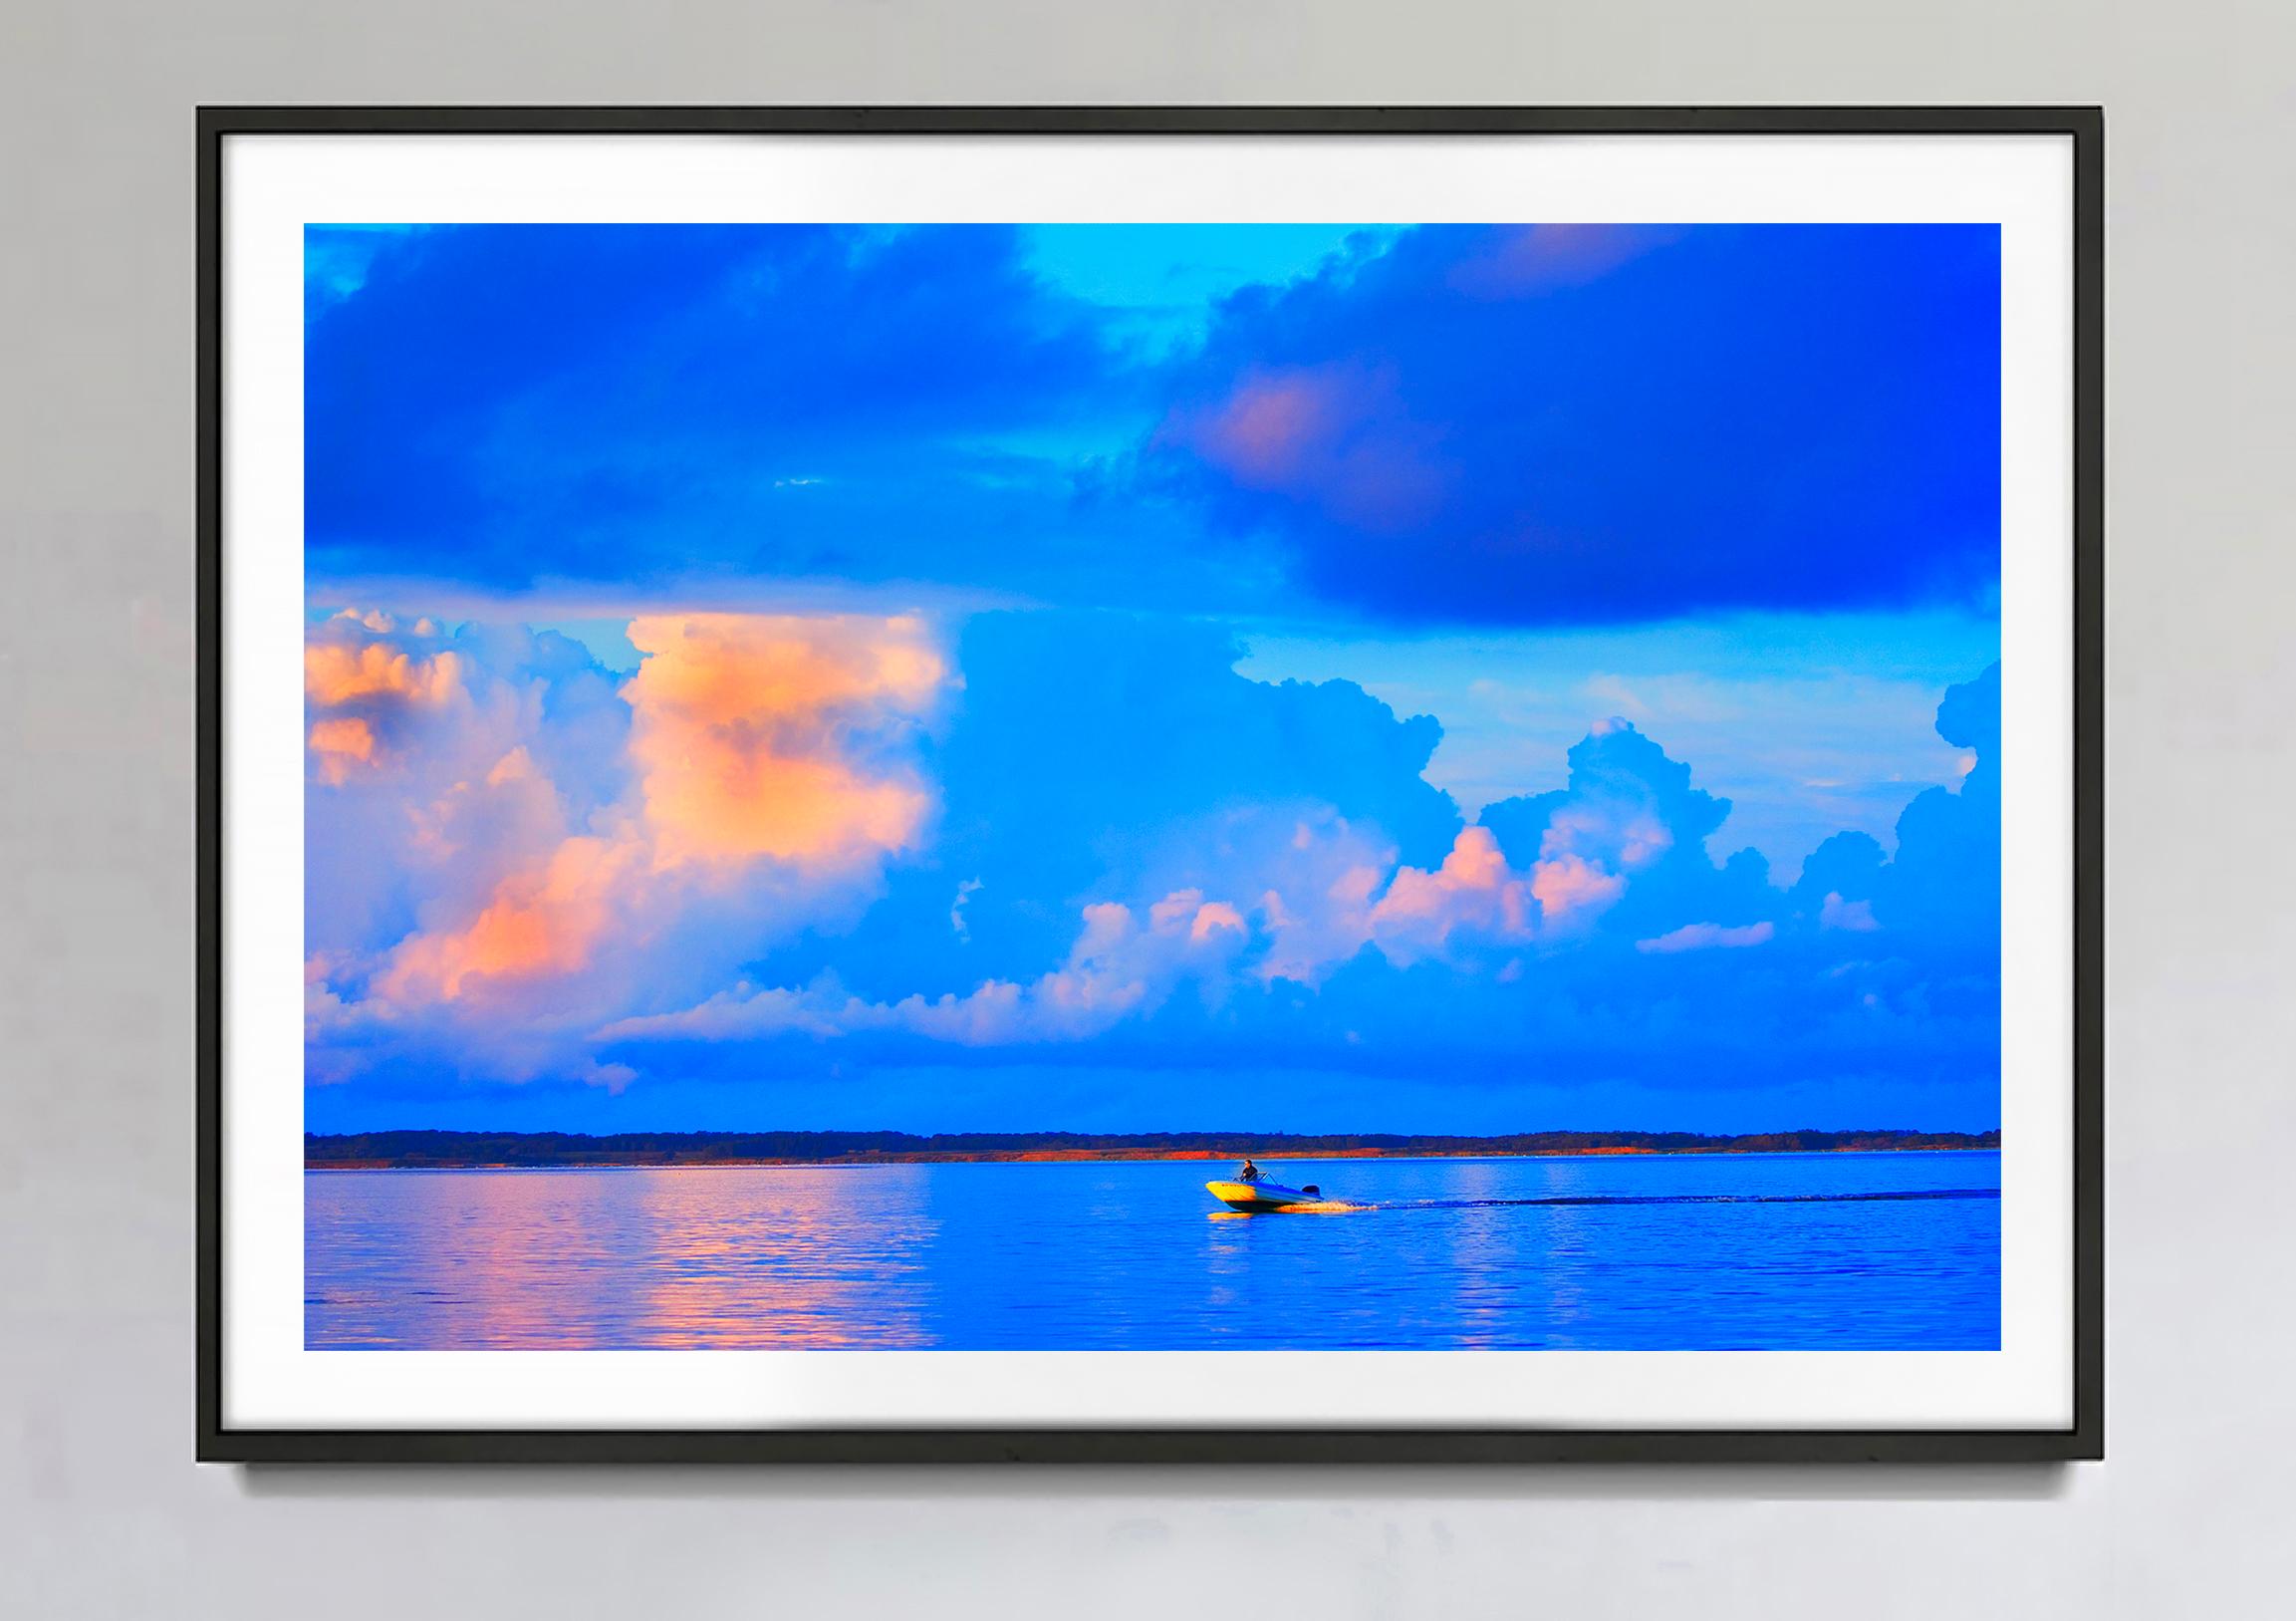 Lone Boat On Gardiners Bay At Sunset, East Hampton - Cerulean Blue Sky - Photograph by Mitchell Funk